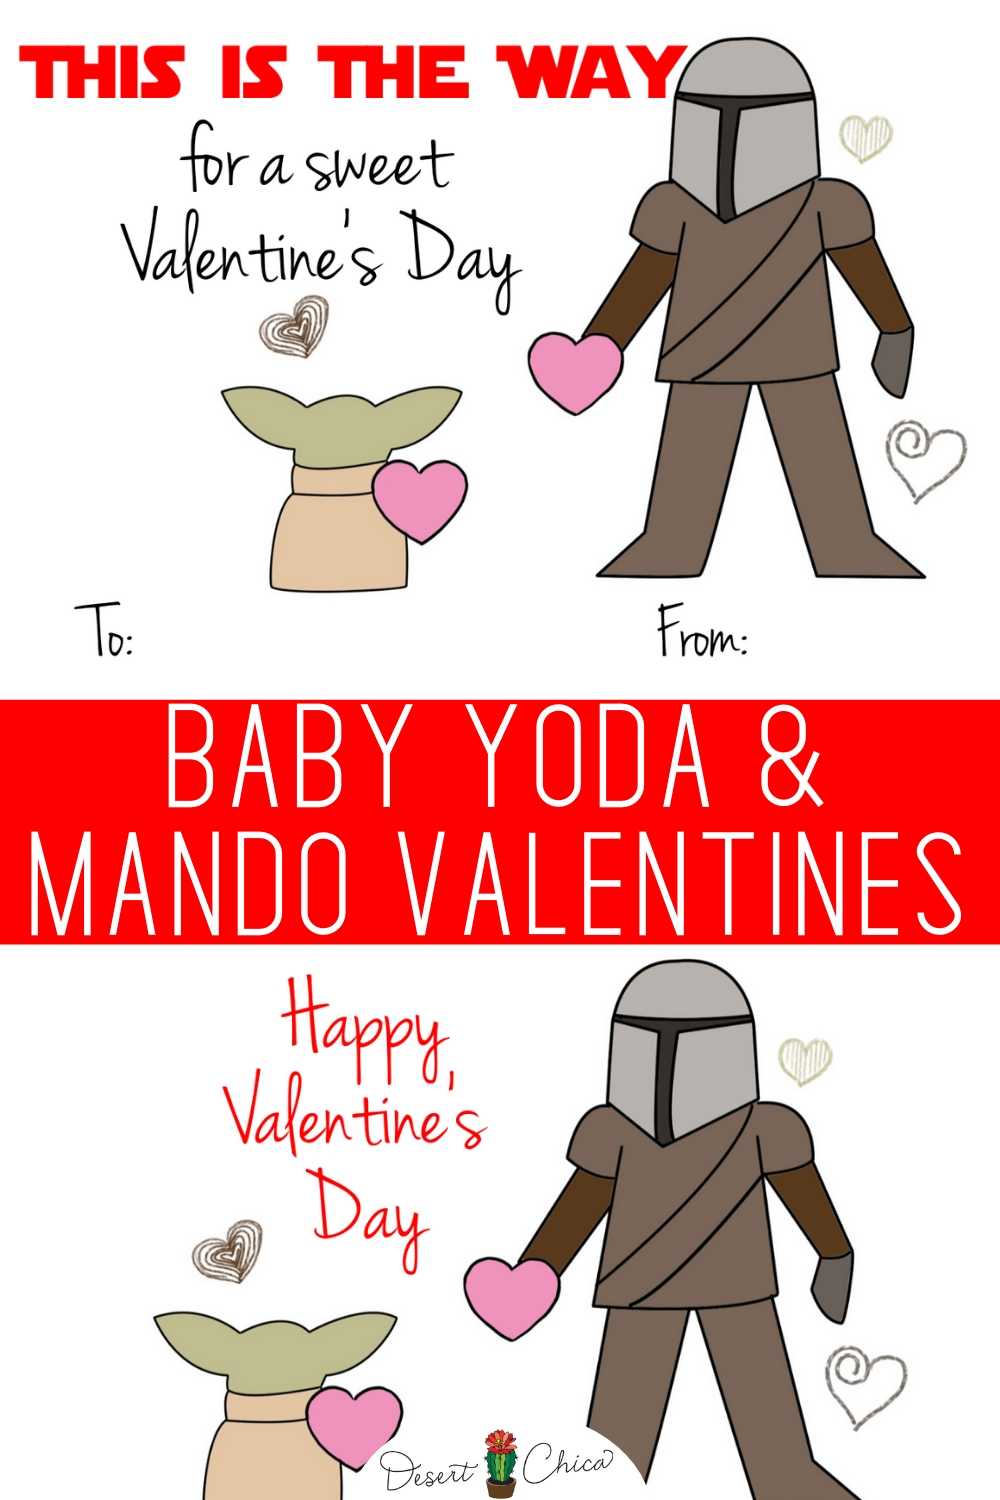 Printable Star Wars Valentines with Baby Yoda and Mando